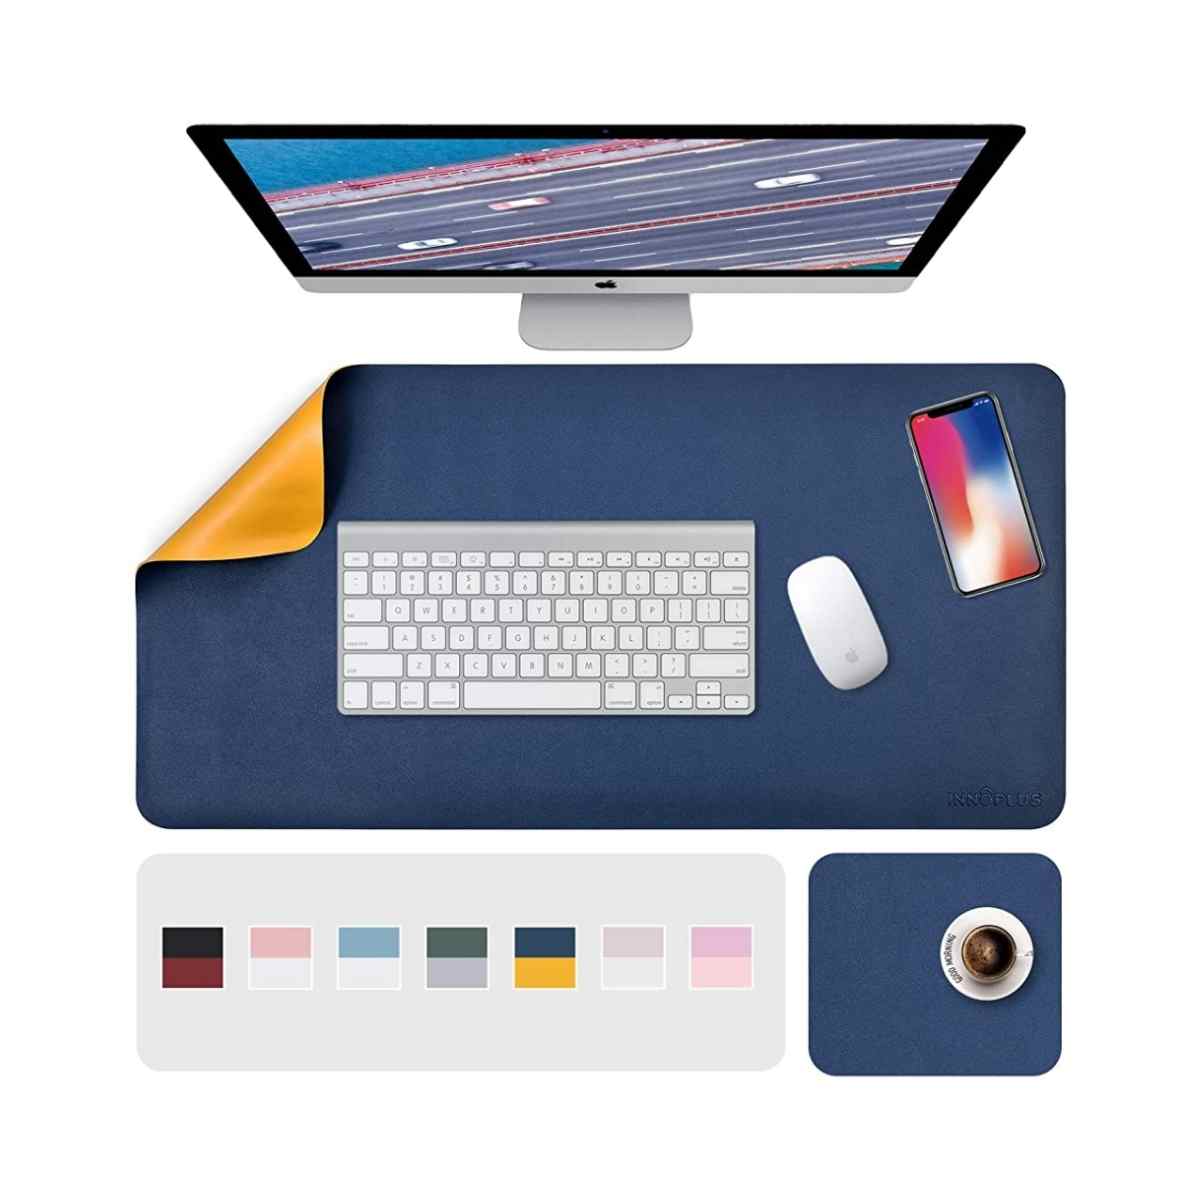 Desk & Mouse Pad drops to $3+ to $7+ (Retails at $9+ - $15+) with code